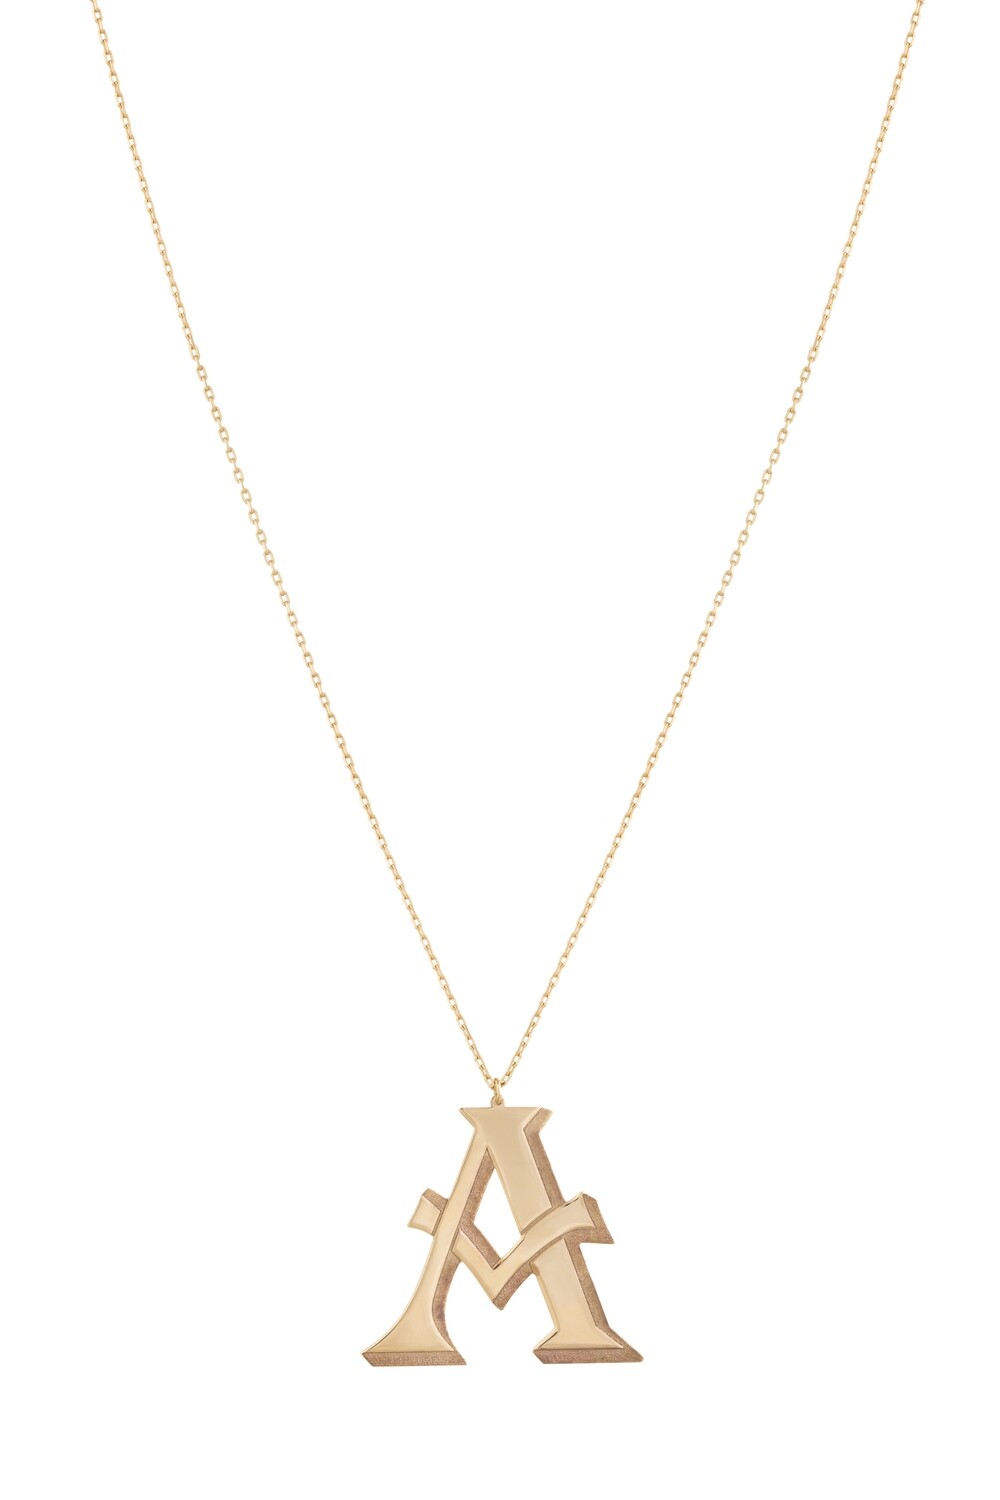 Initials Gold Necklace Letter A